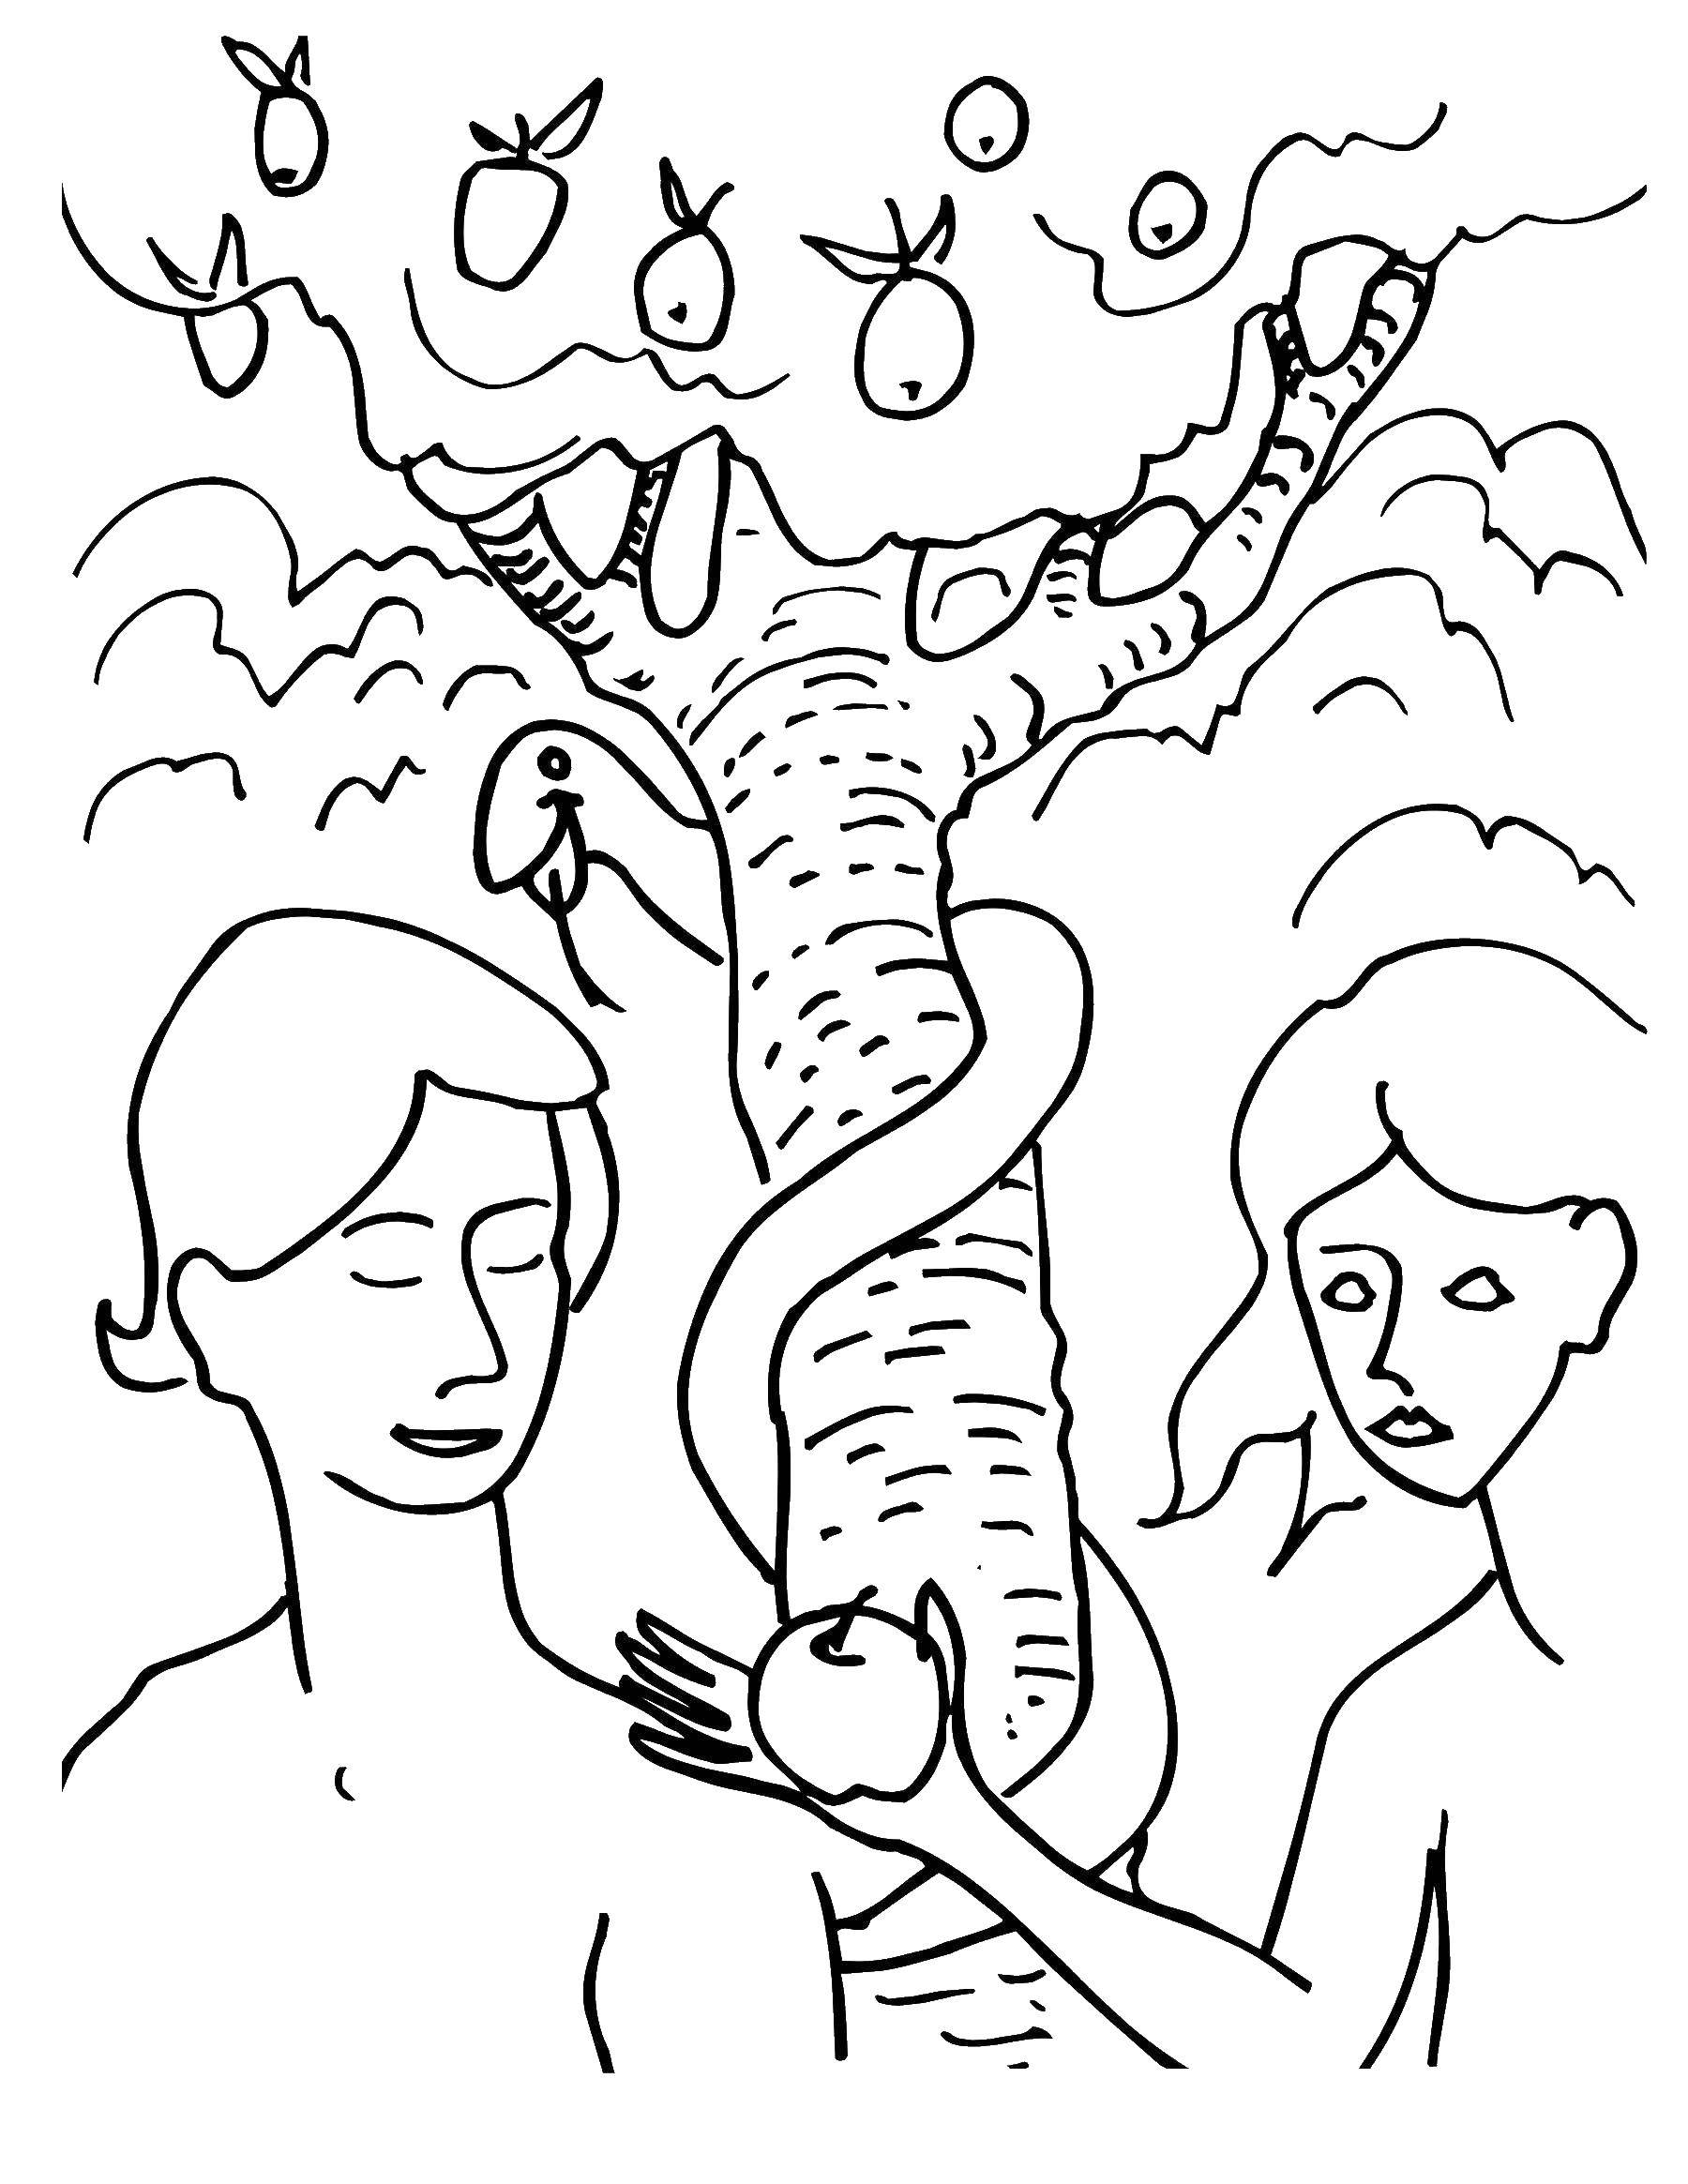 Coloring Adam and eve at the forbidden fruit. Category Adam and eve. Tags:  Adam, eve, world, earth.